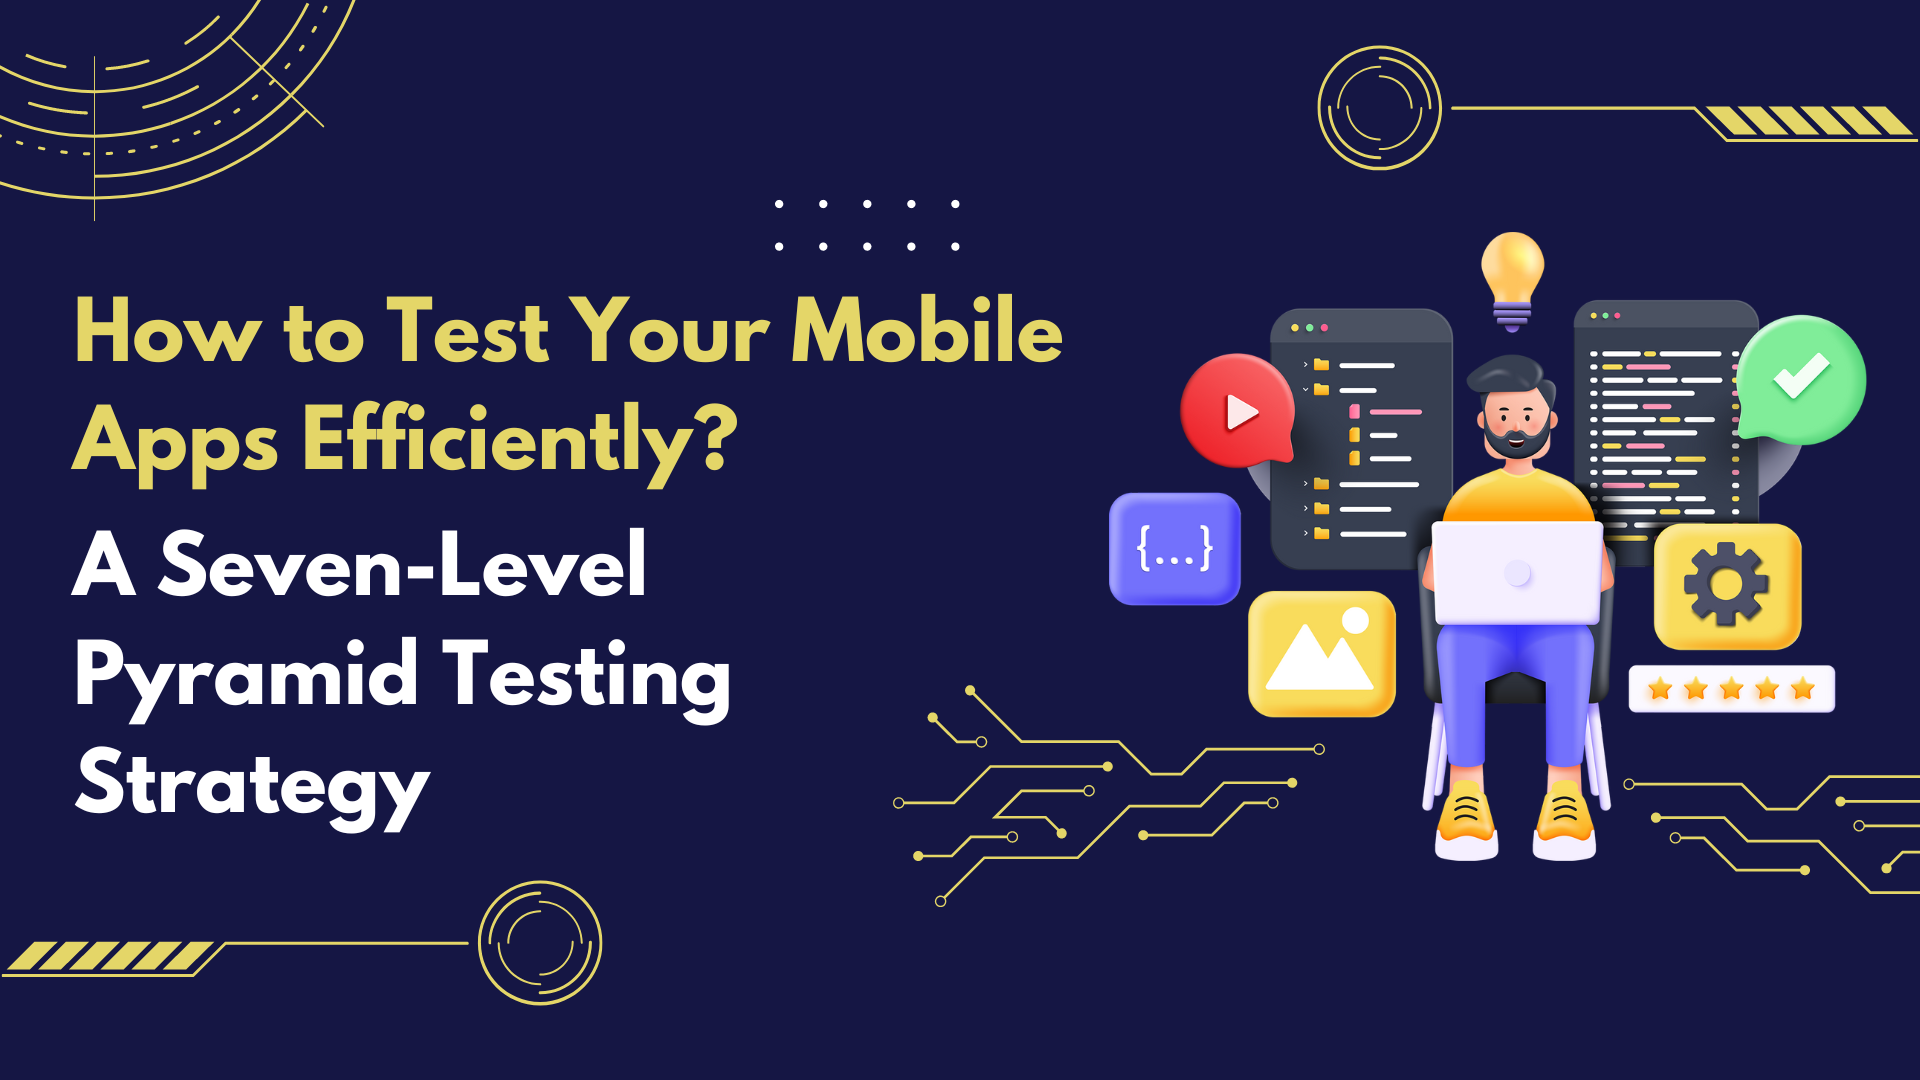 How to Test Your Mobile Apps Efficiently? A Seven-Level Pyramid Testing Strategy